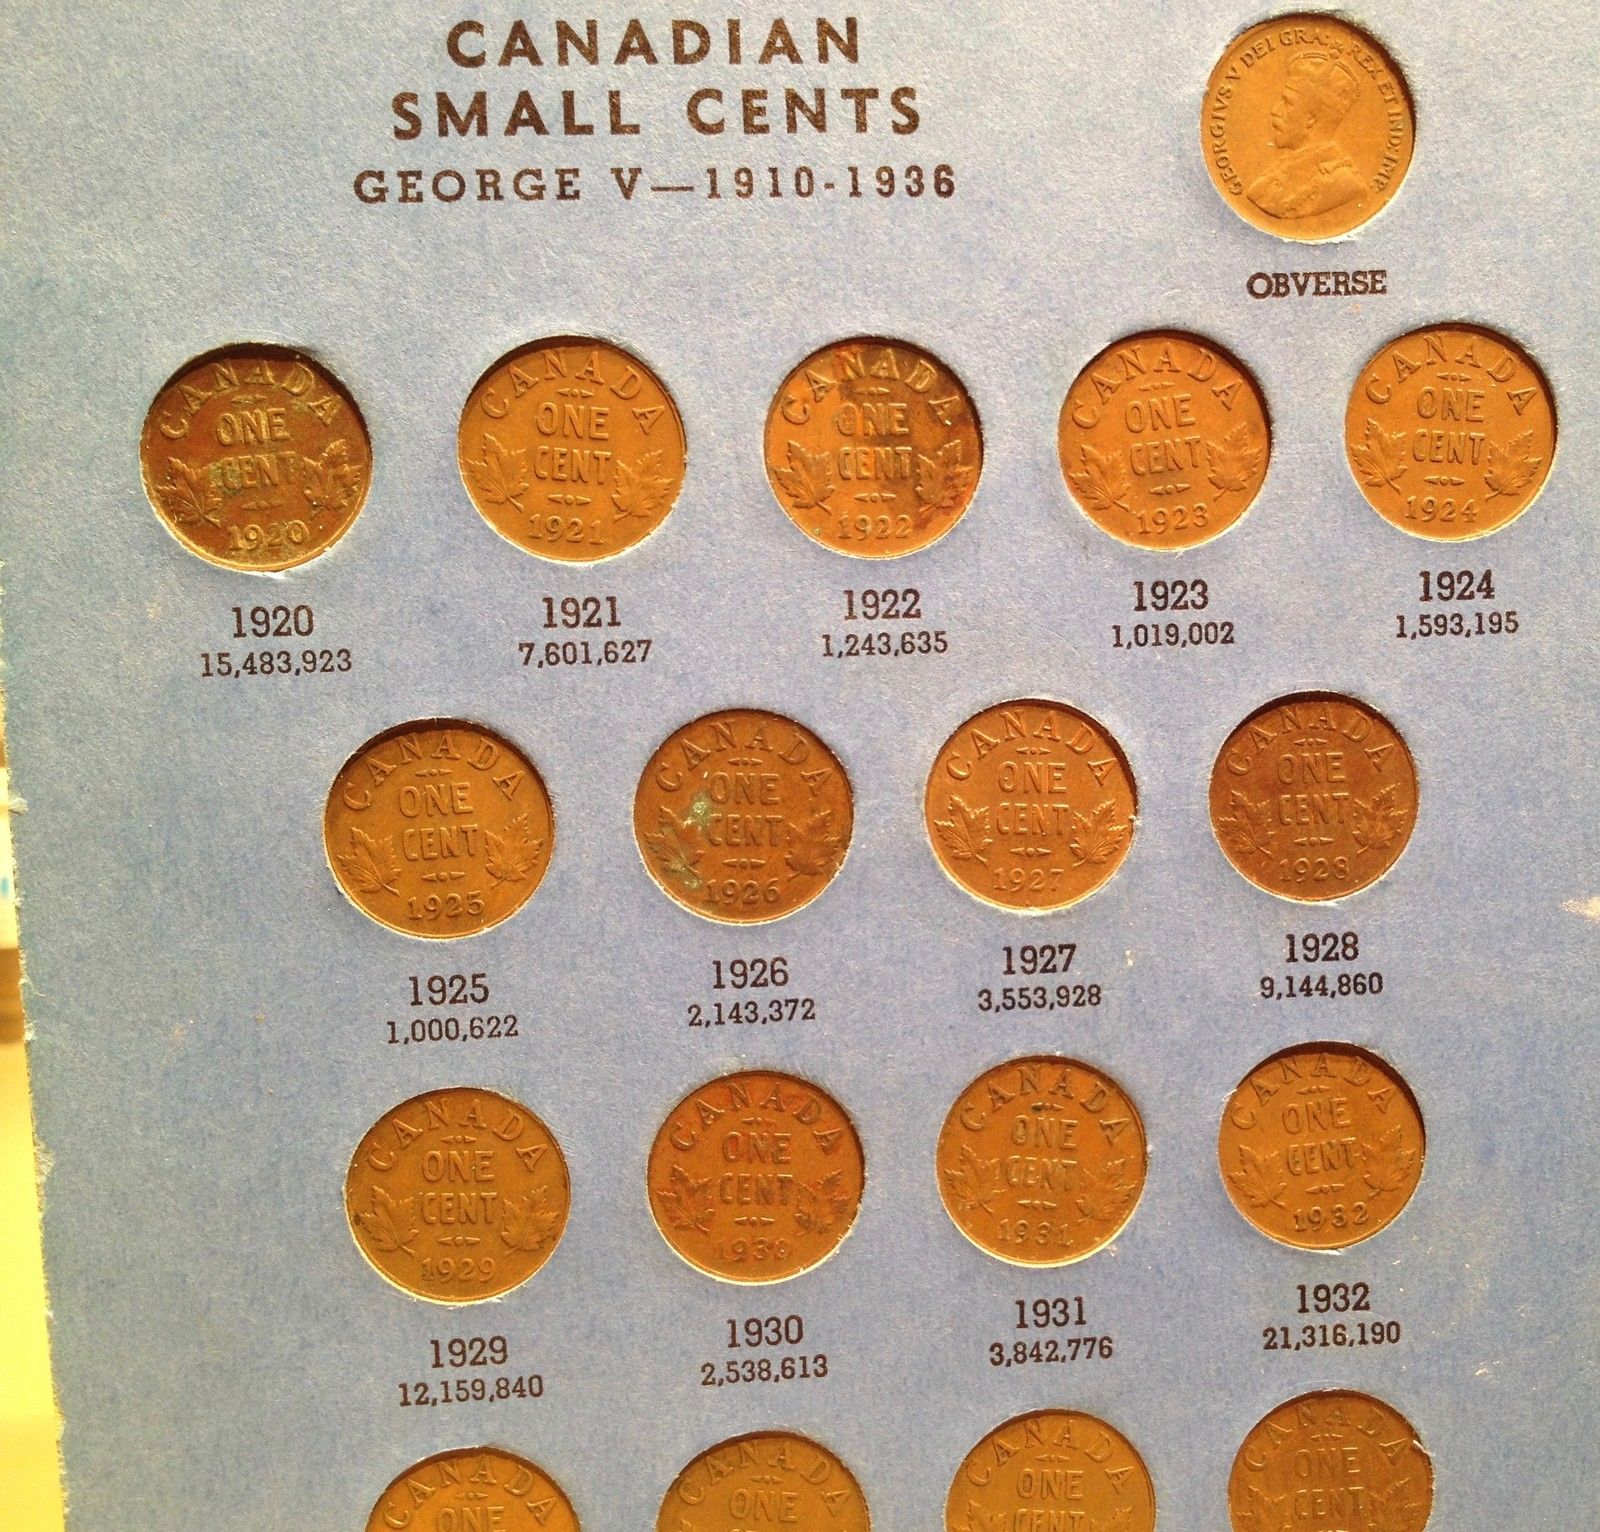 Complete set of Canada Small Cents in Whitman folder - includes all key dates